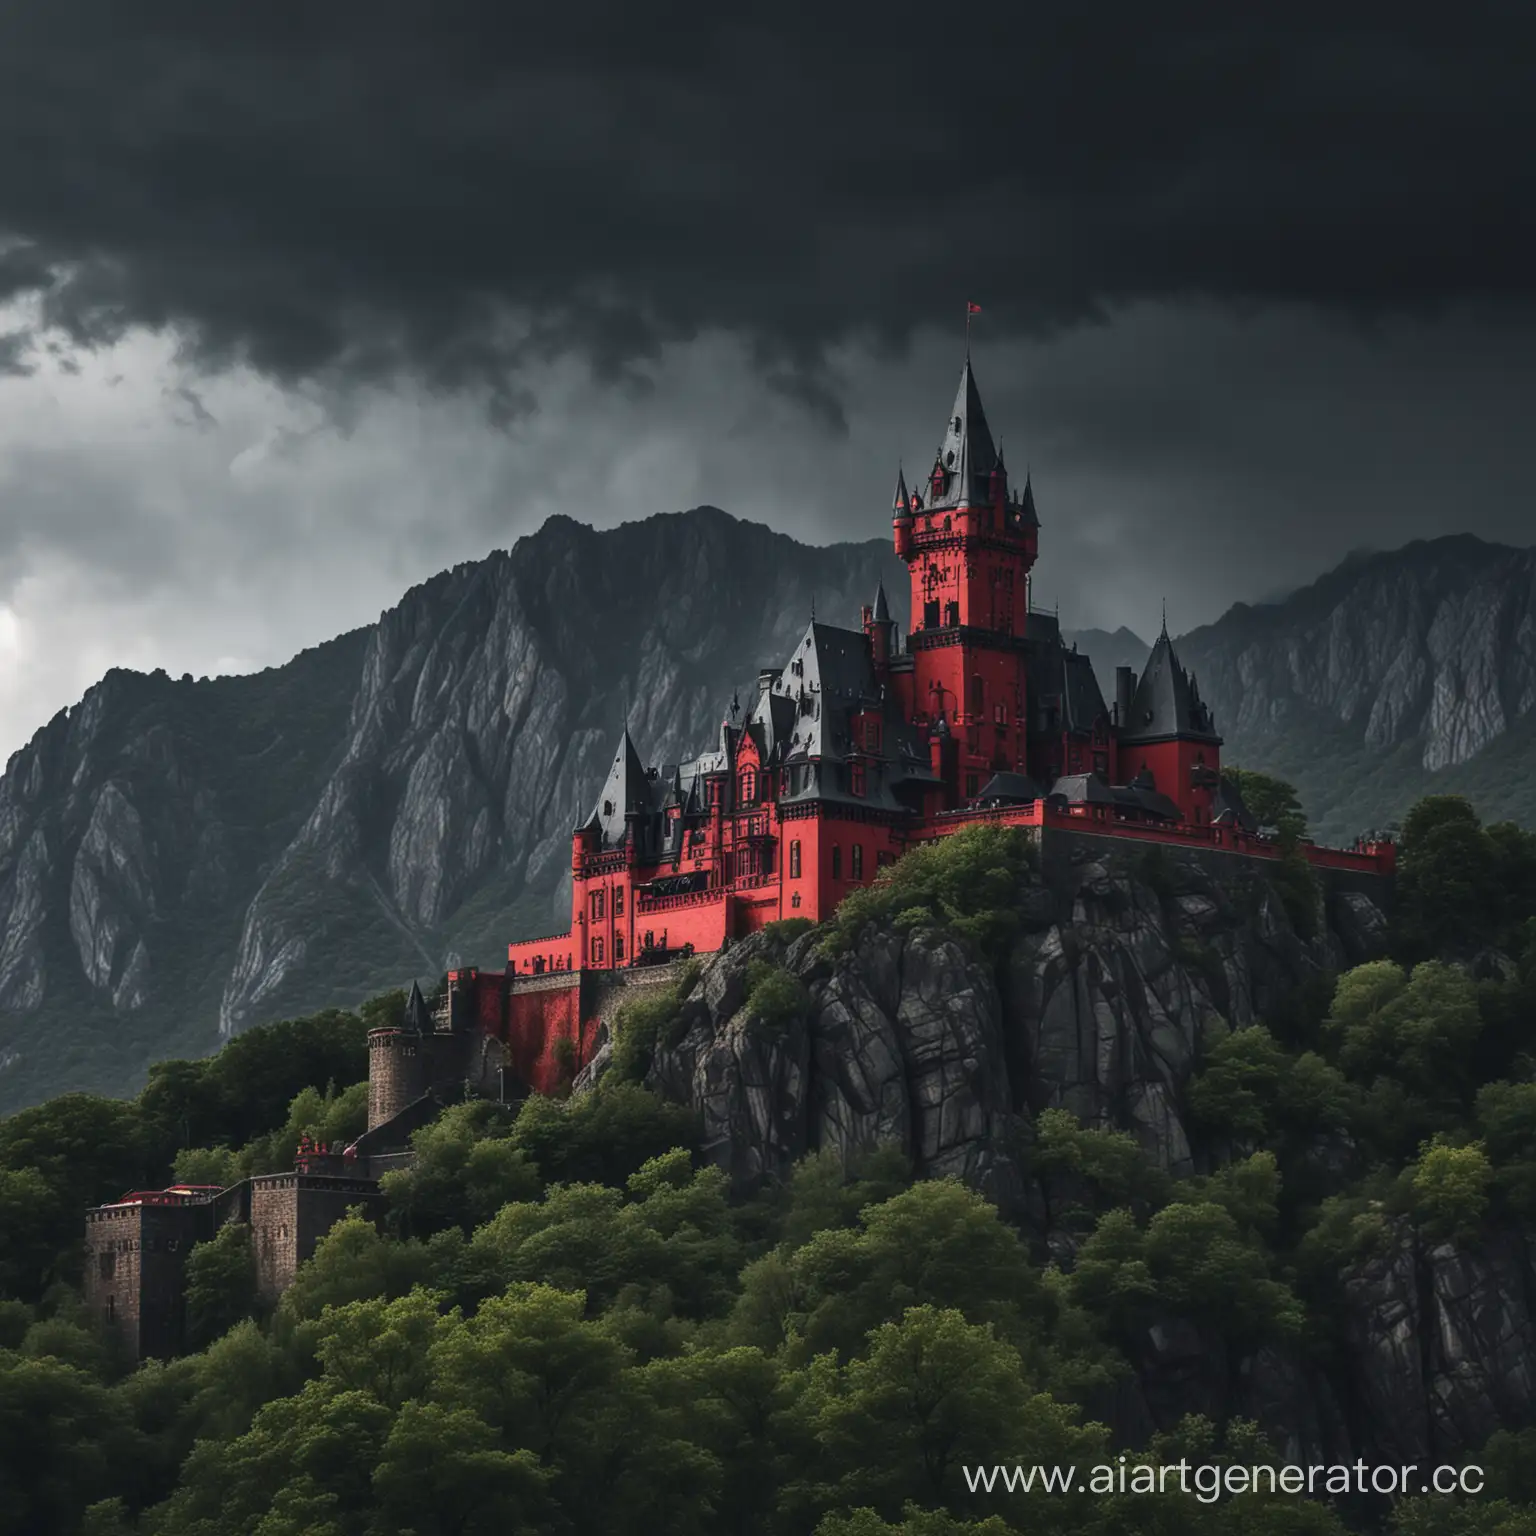 CastleLike-Mansion-in-Black-and-Red-Amidst-Approaching-Storm-in-Mountainous-Terrain